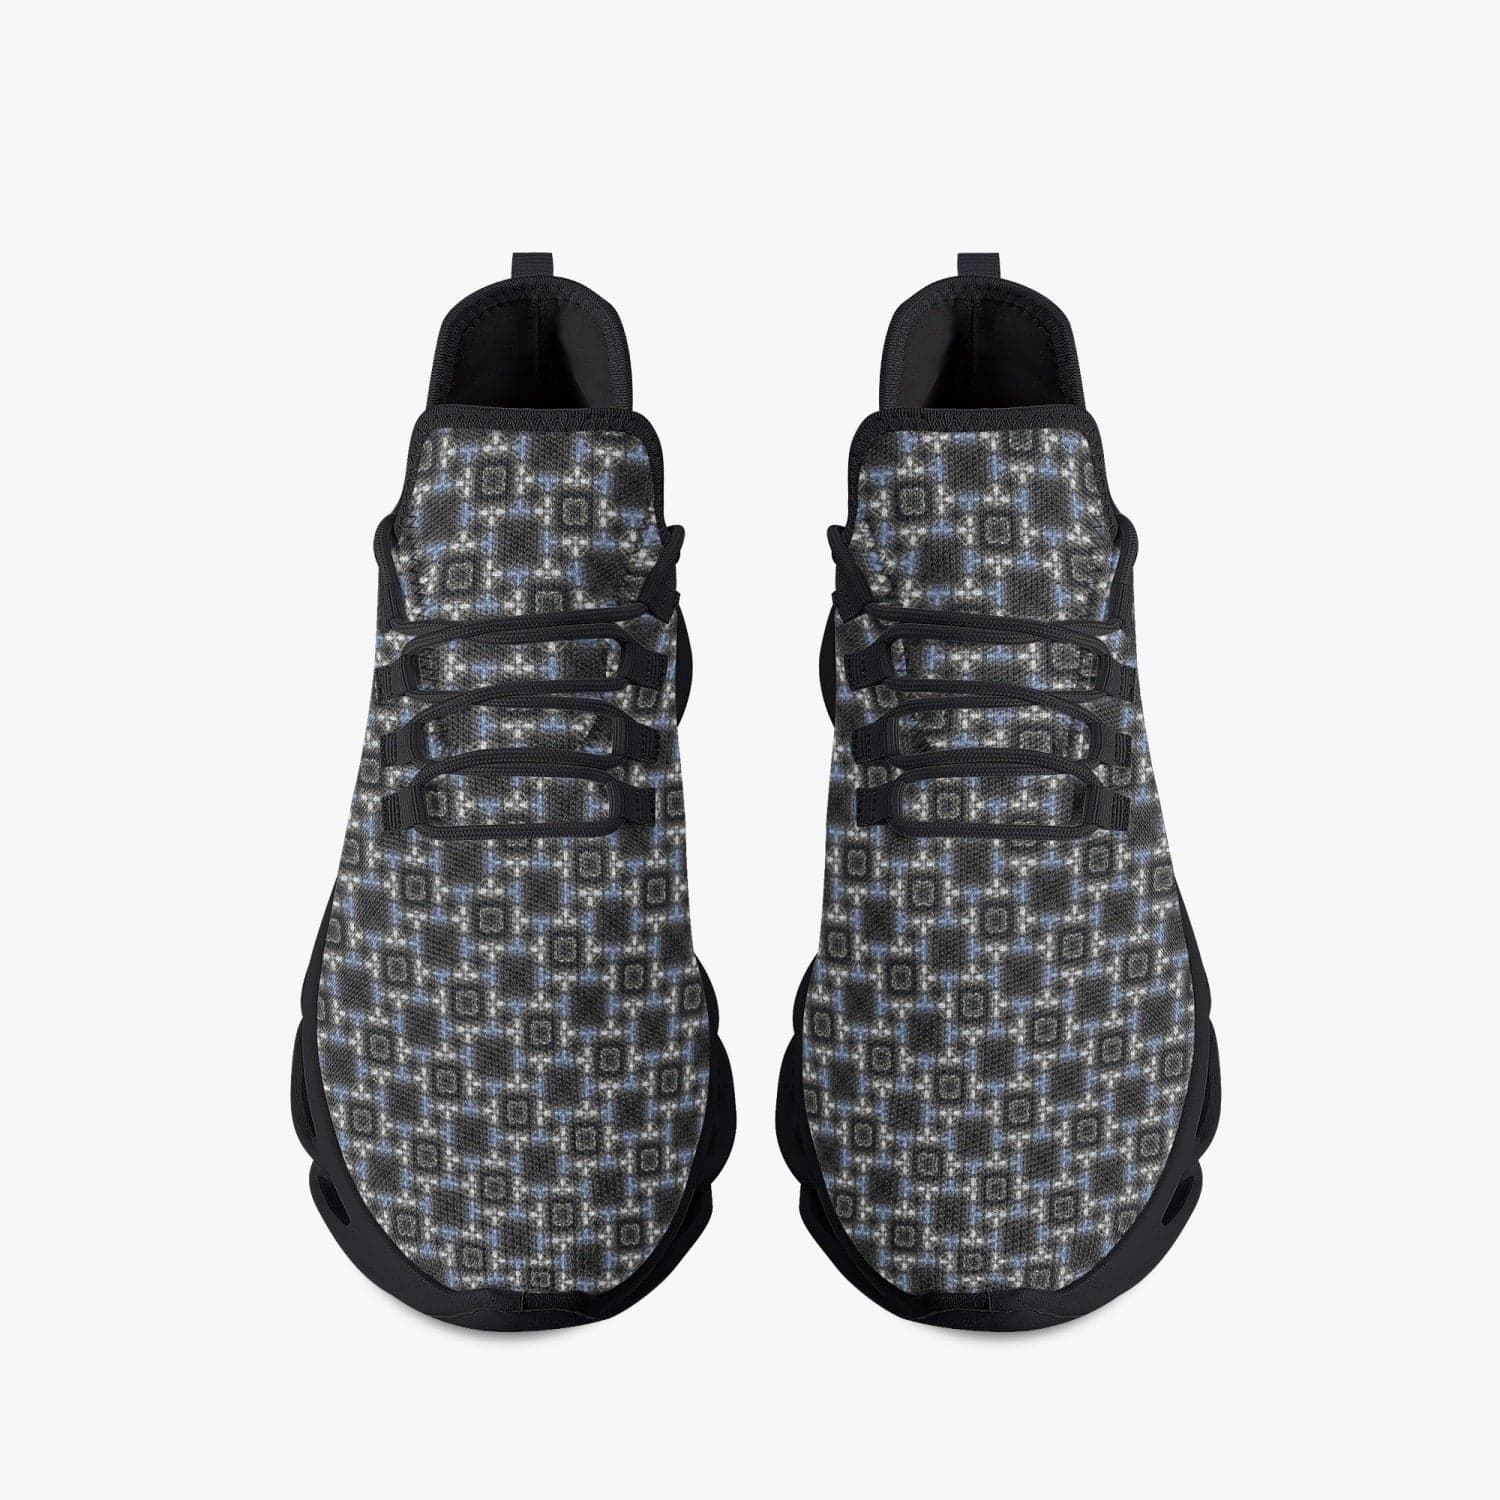 Mountain field with snow,  Bounce Mesh Knit  Trendy Sneakers for women and men- Black, designed by Sensus Studio Design